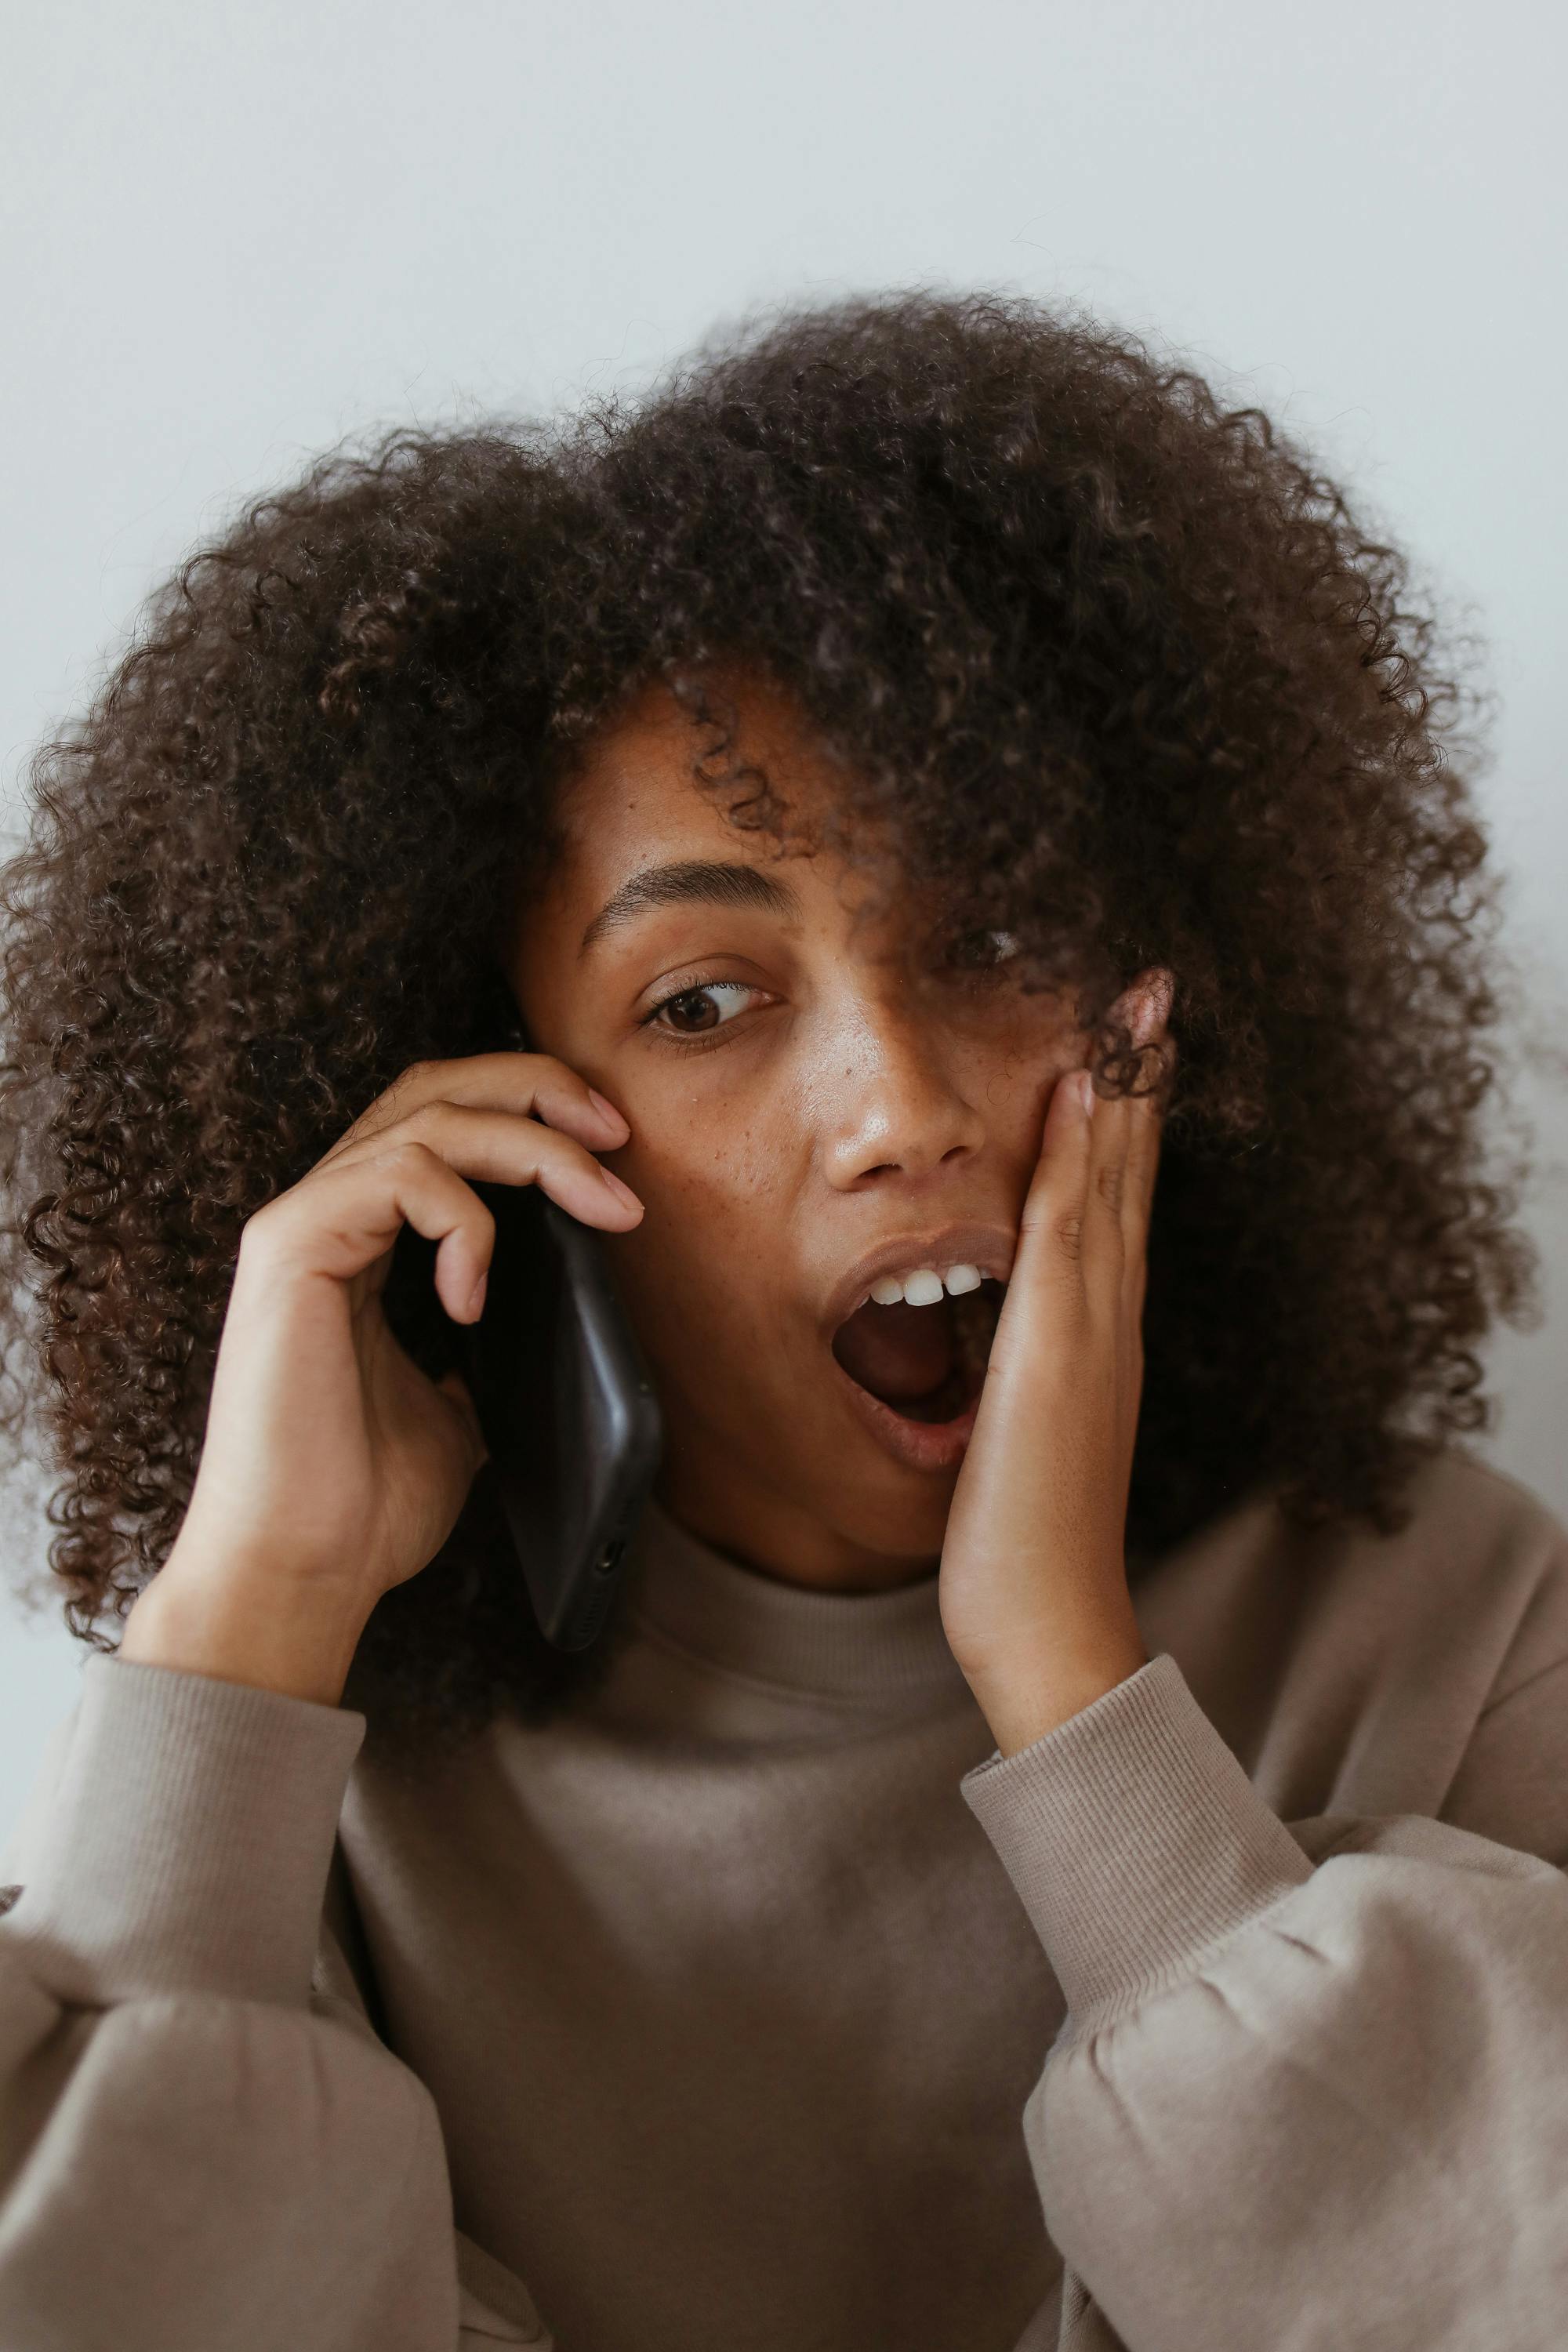 A shocked woman talking to someone on the phone | Source: Pexels